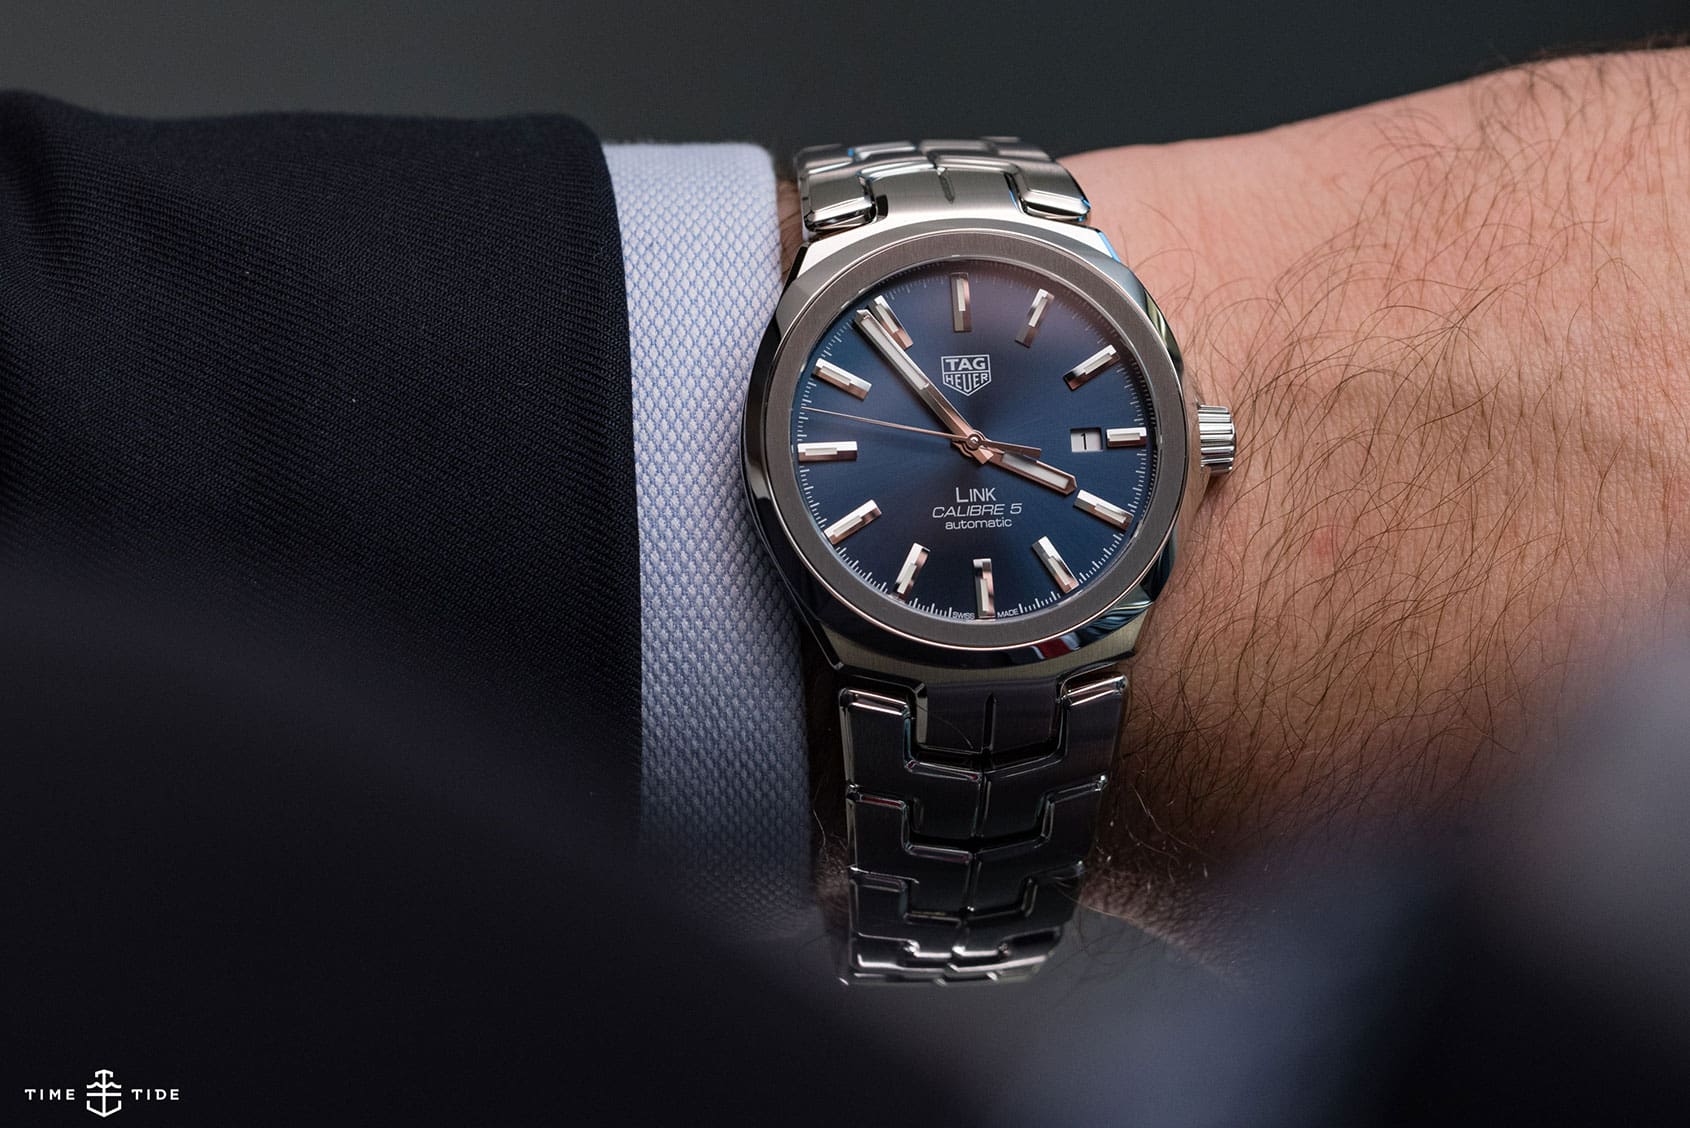 VIDEO: The dressy new face of the TAG Heuer Link 